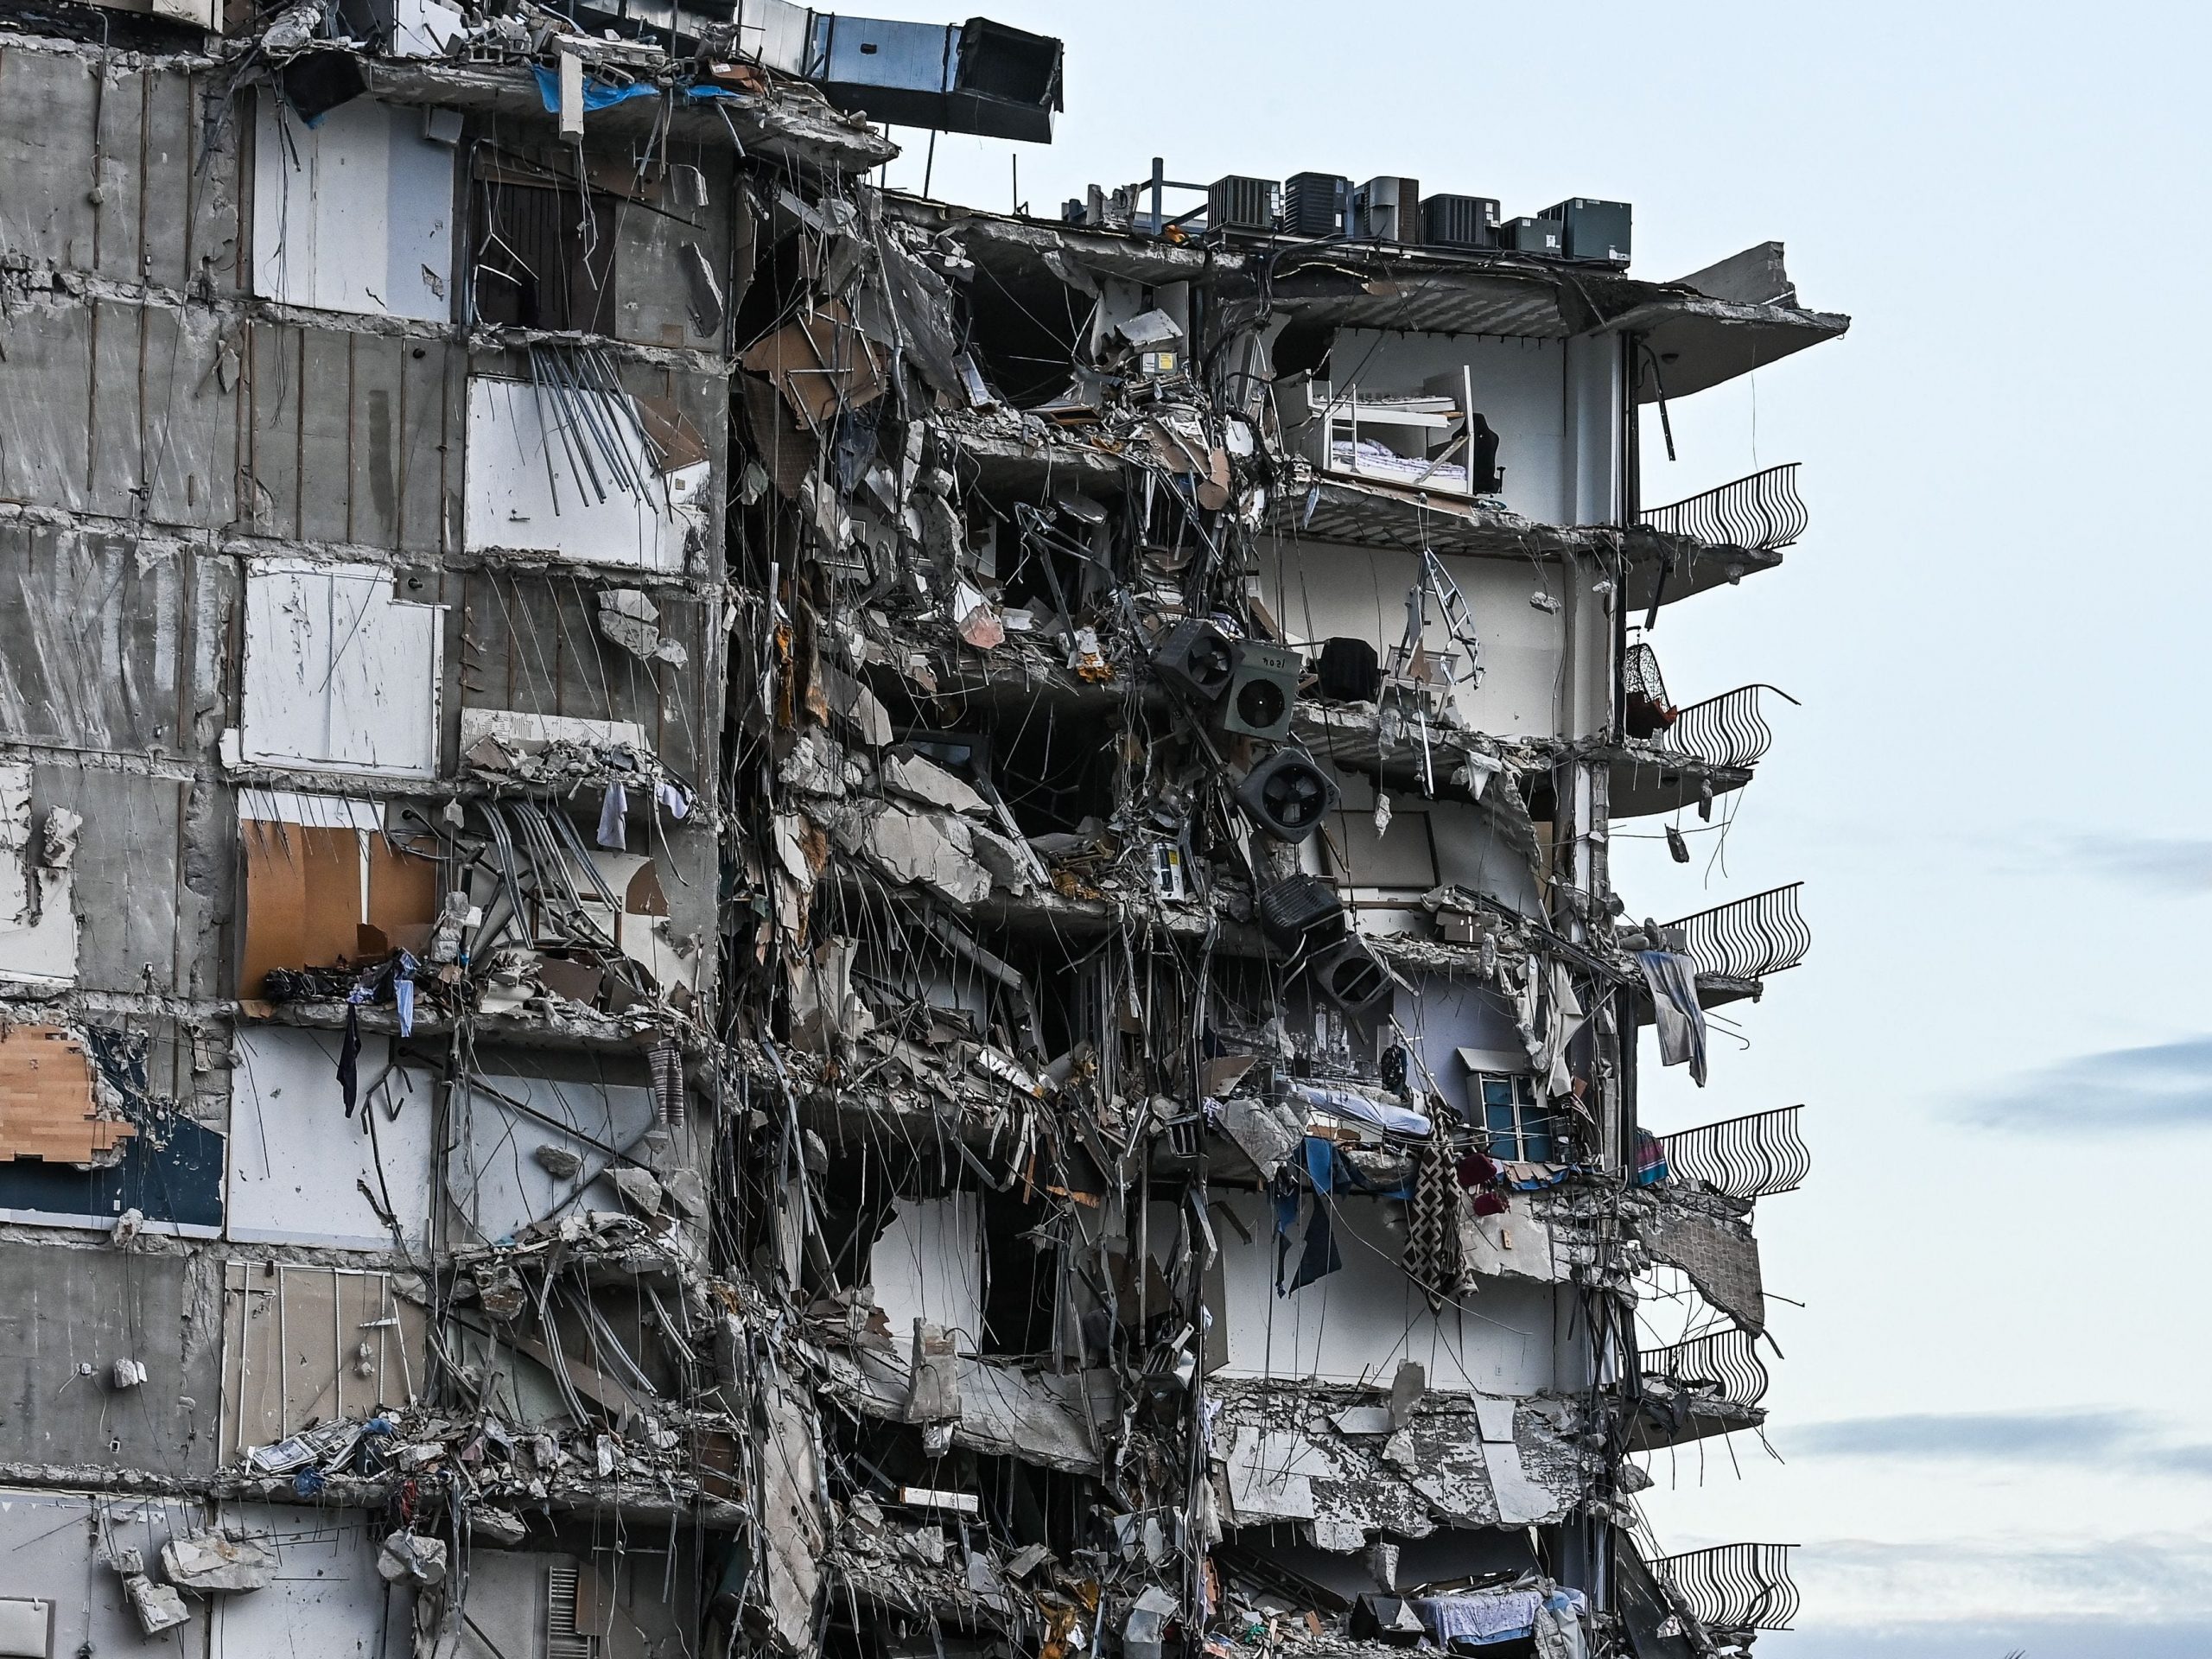 Rubble hangs from a partially collapsed building in Surfside north of Miami Beach, on June 24, 2021.